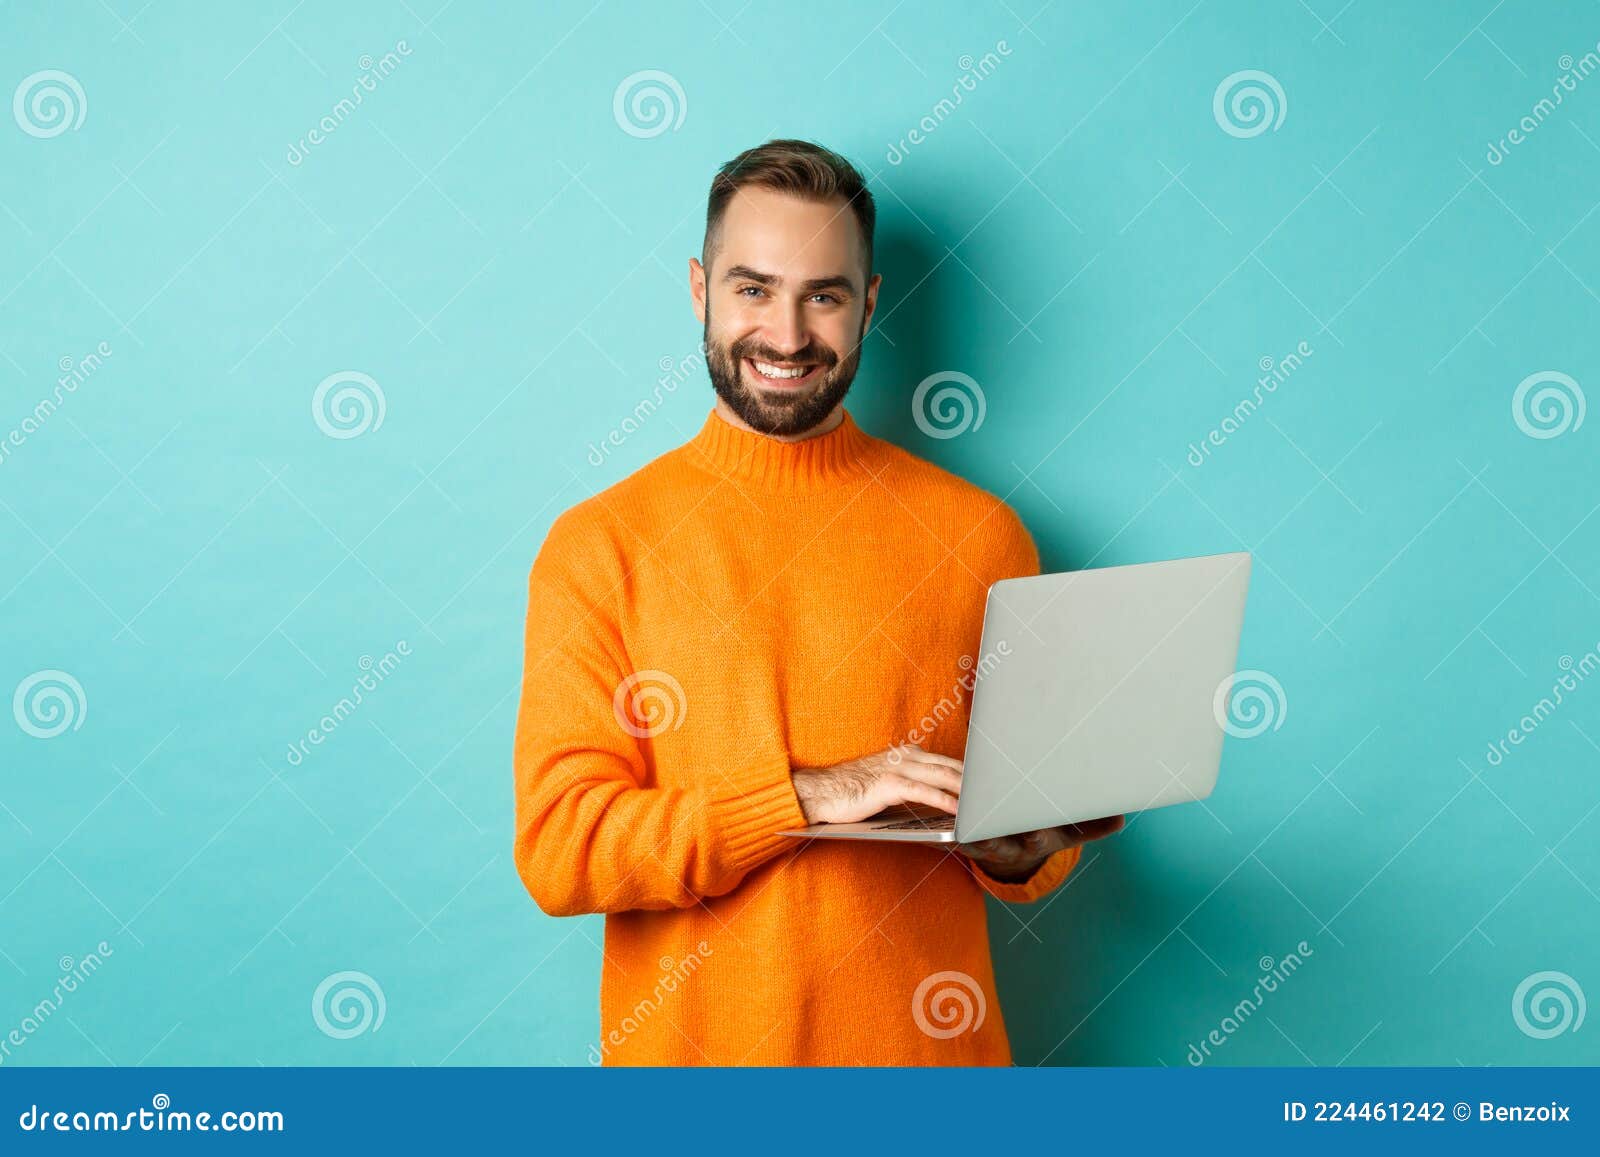 Handsome Adult Man Freelancer Working with Laptop, Smiling at Camera ...